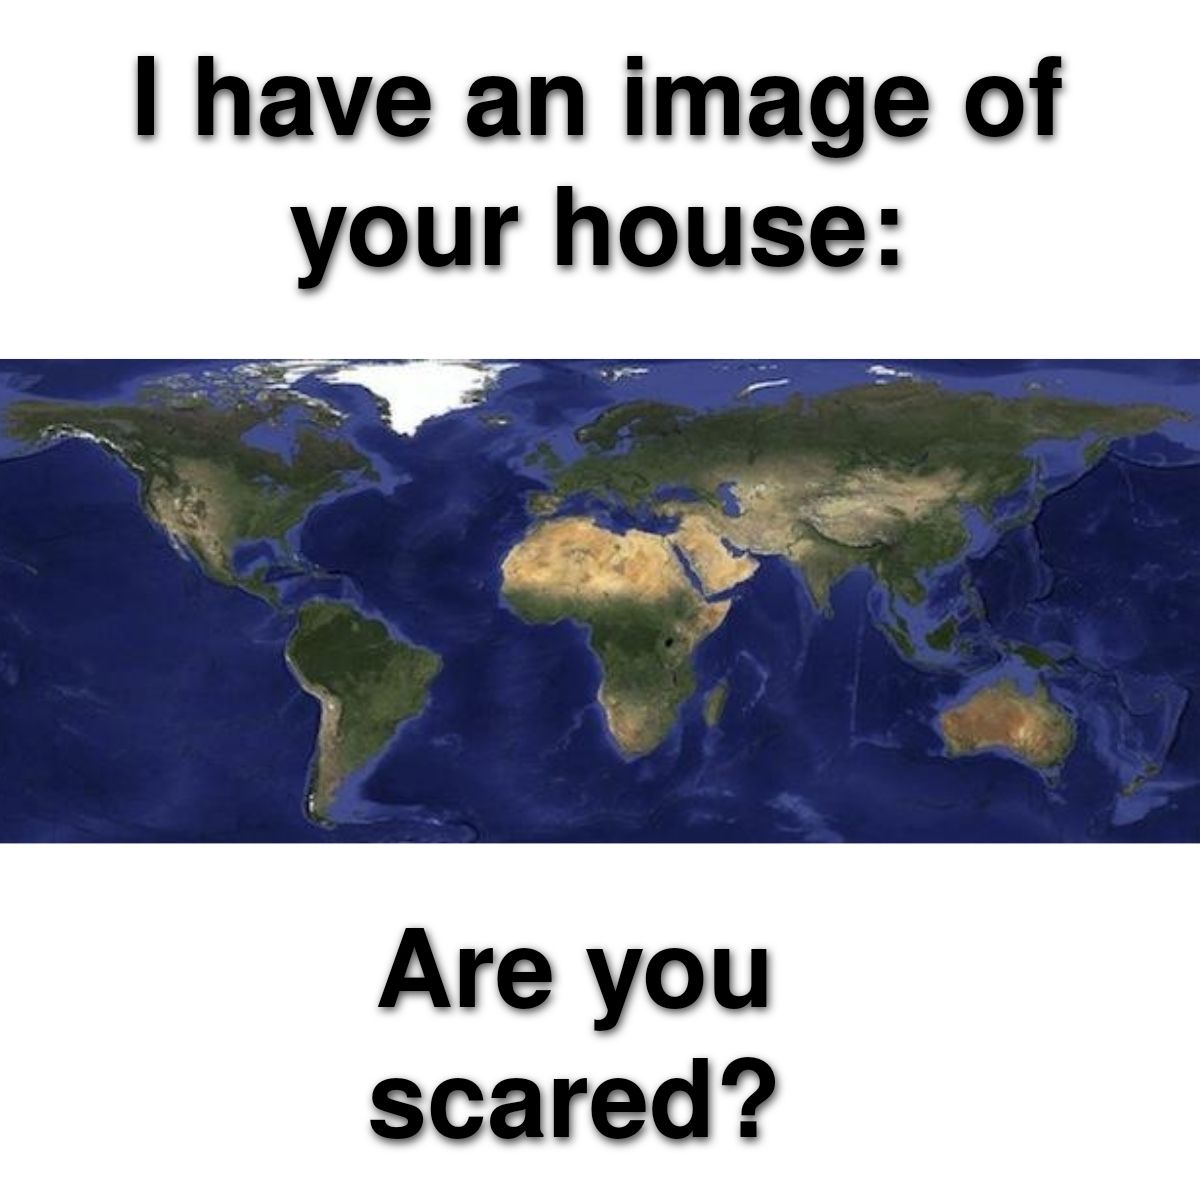 Don't you feel a bit scared?